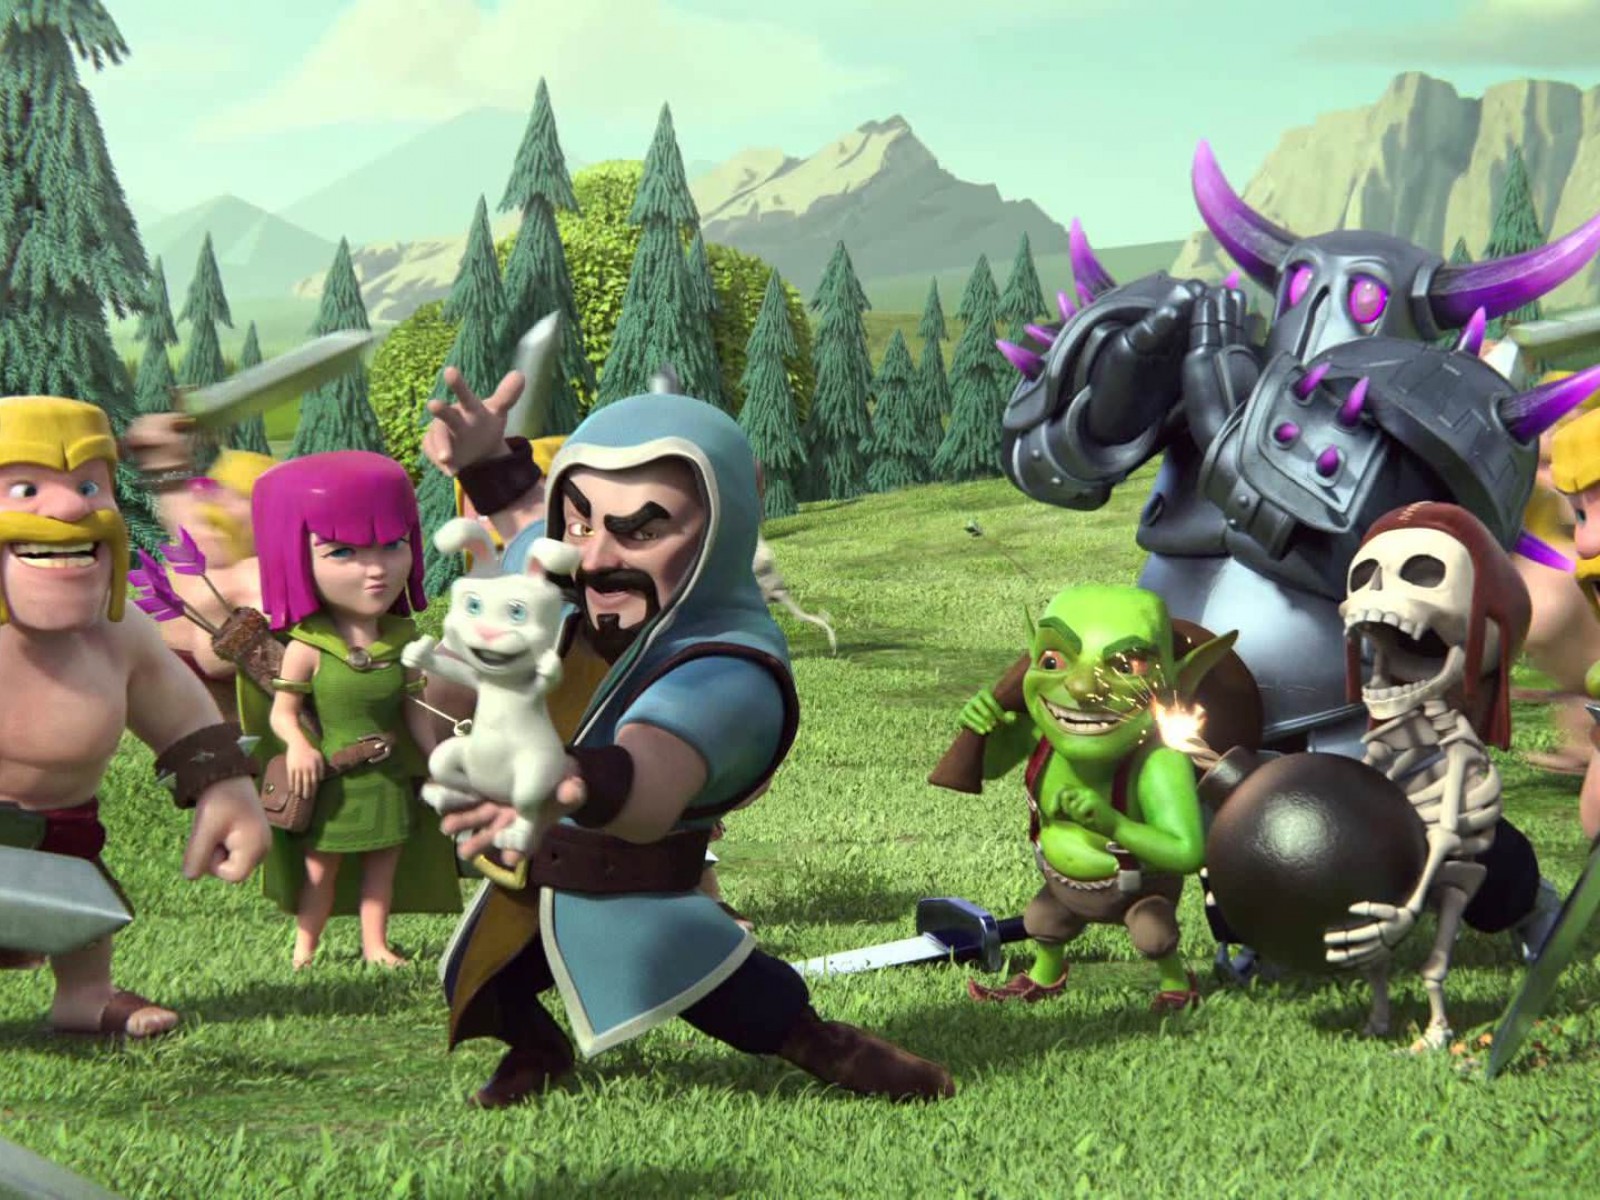 Clash of Clans Wizard Hd Wallpaper for Desktop and Mobiles - 1600x1200.